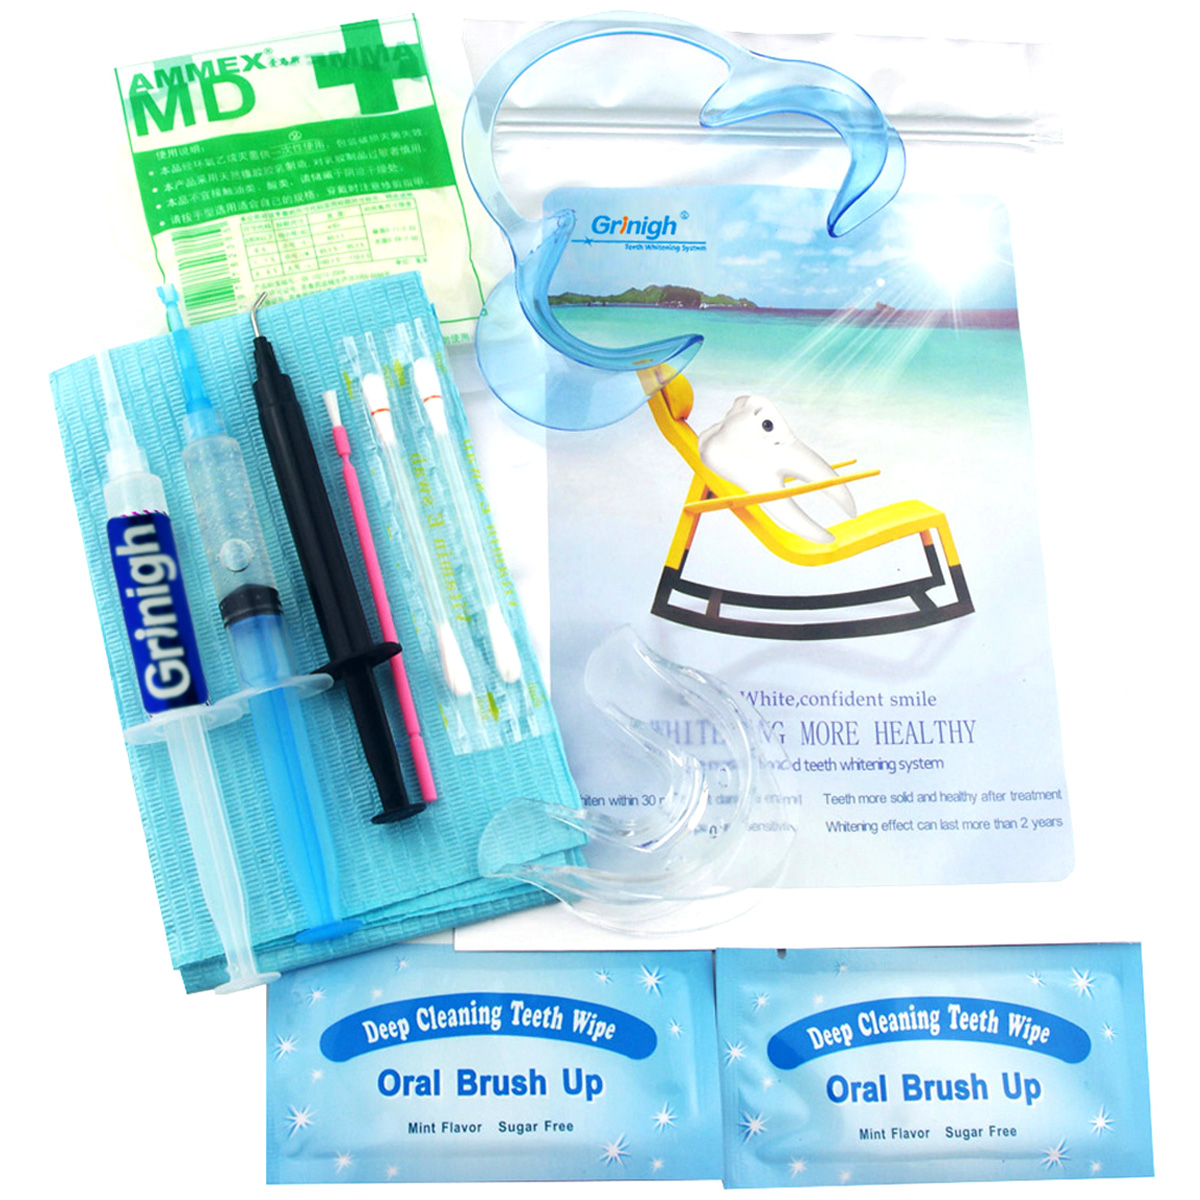 Grinigh Professional Teeth Whitening System Deluxe Kit ...